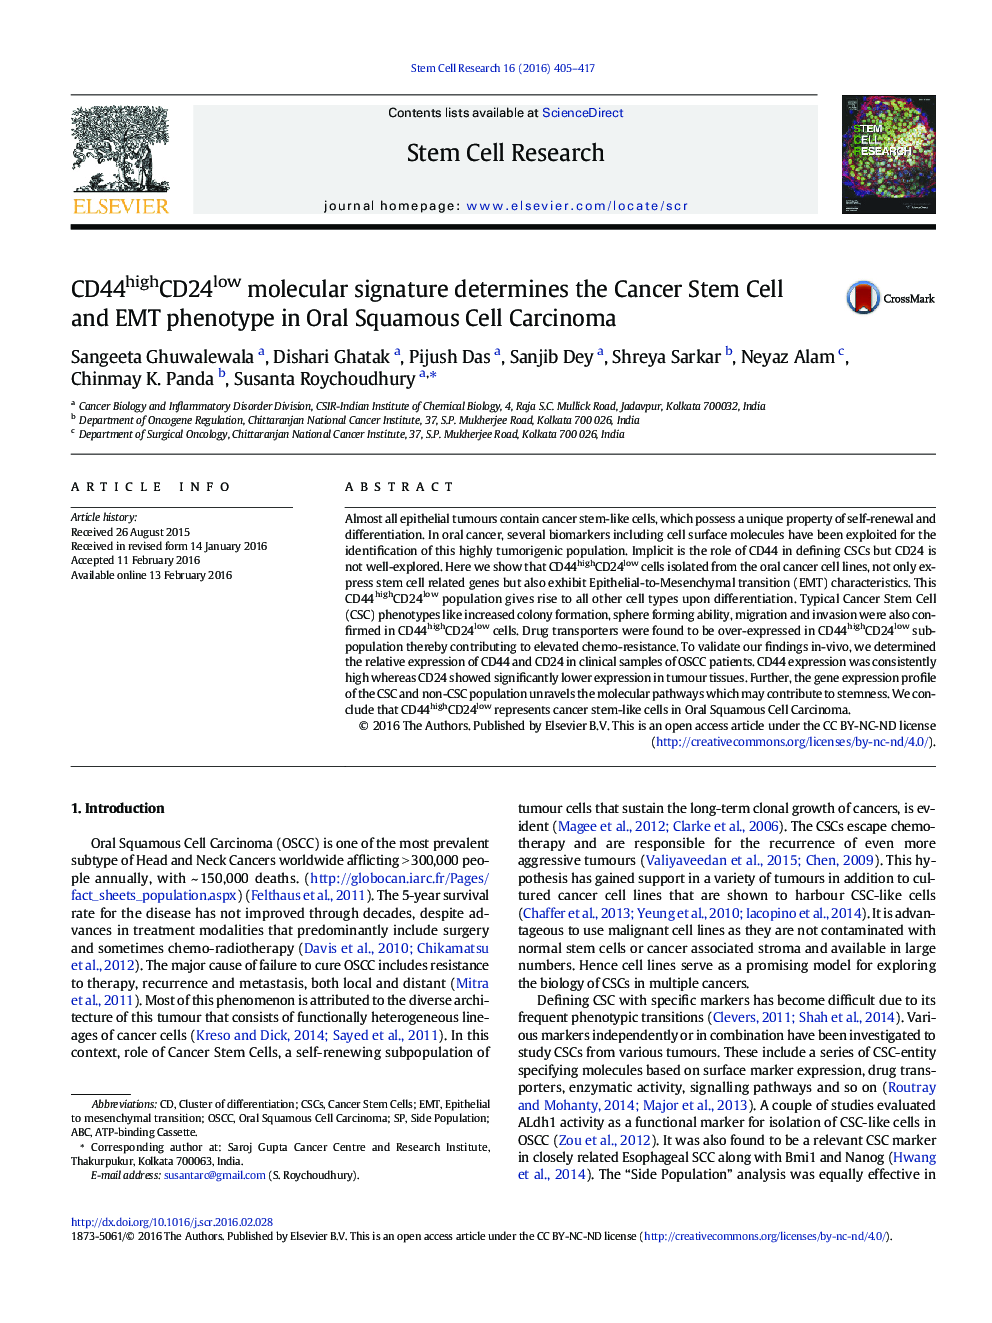 CD44highCD24low molecular signature determines the Cancer Stem Cell and EMT phenotype in Oral Squamous Cell Carcinoma